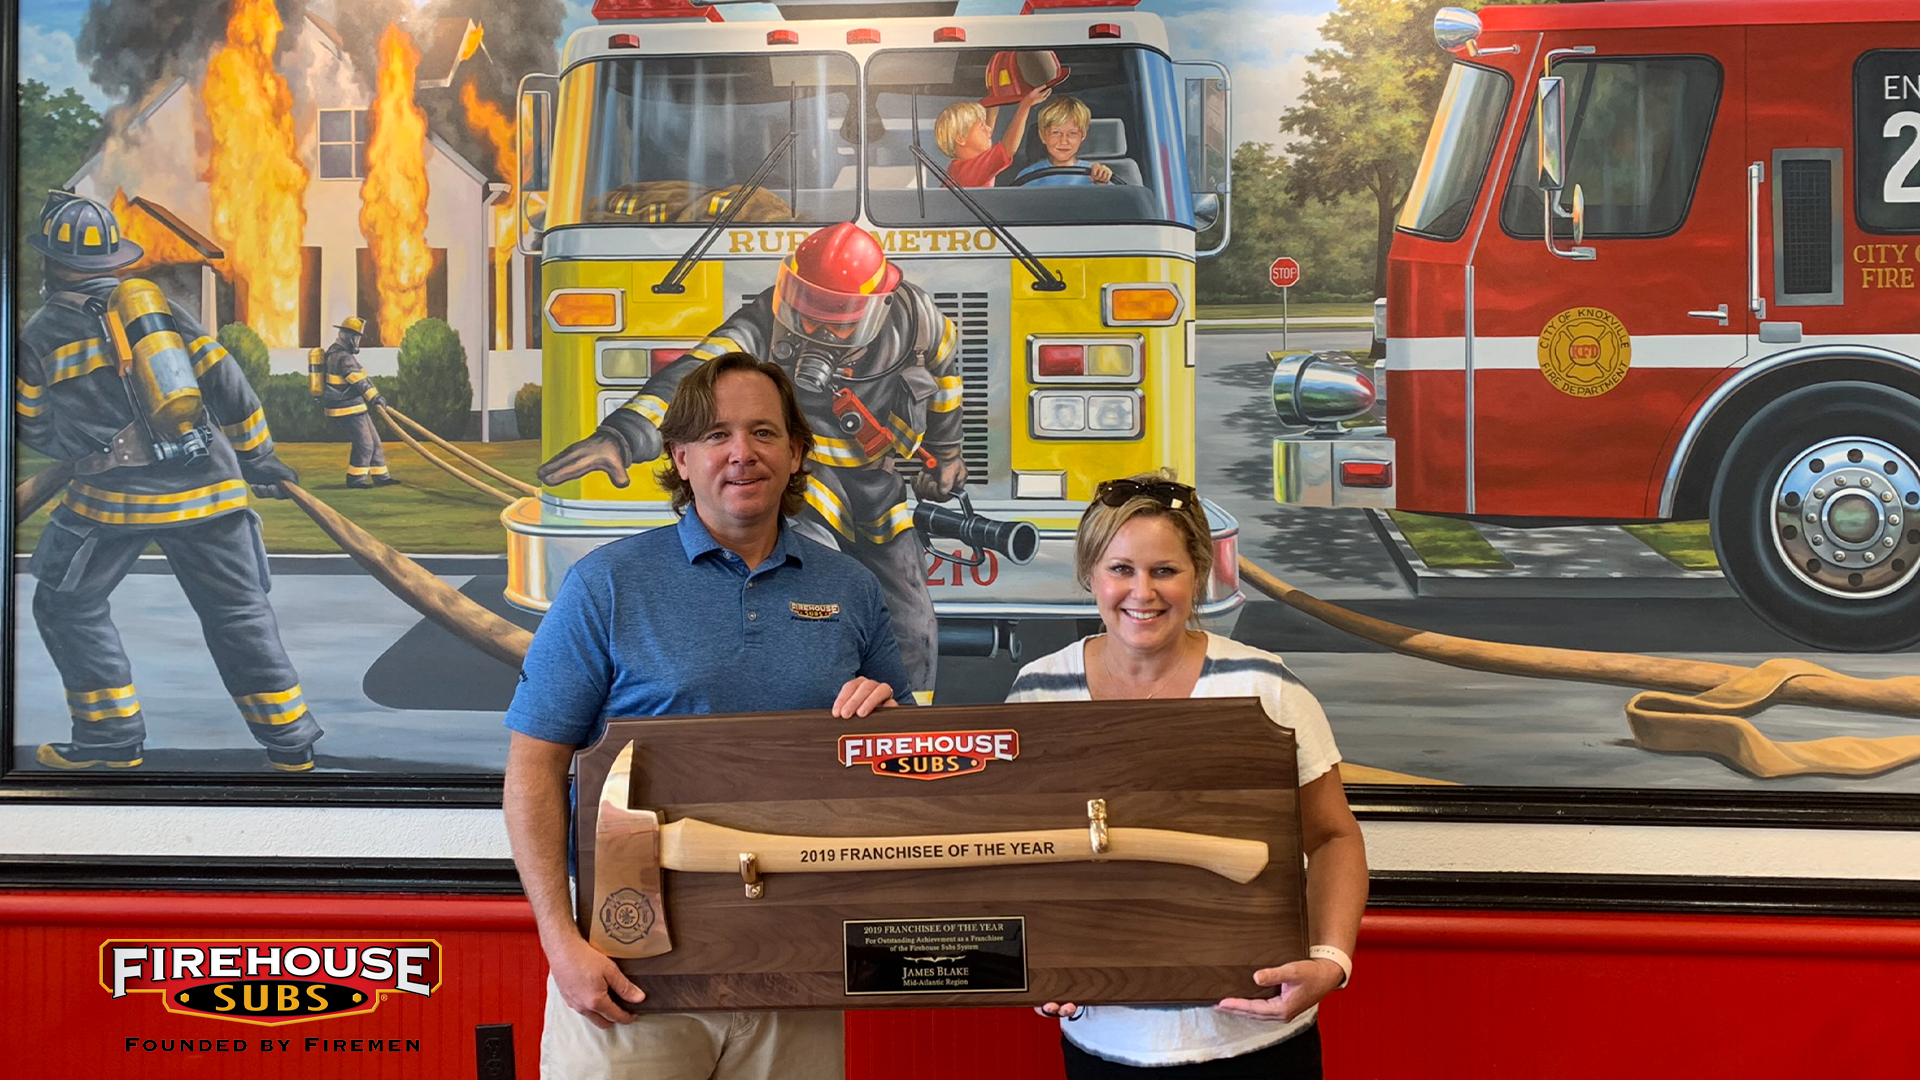 Local Firehouse Subs Owner Wins Franchisee of the Year Award